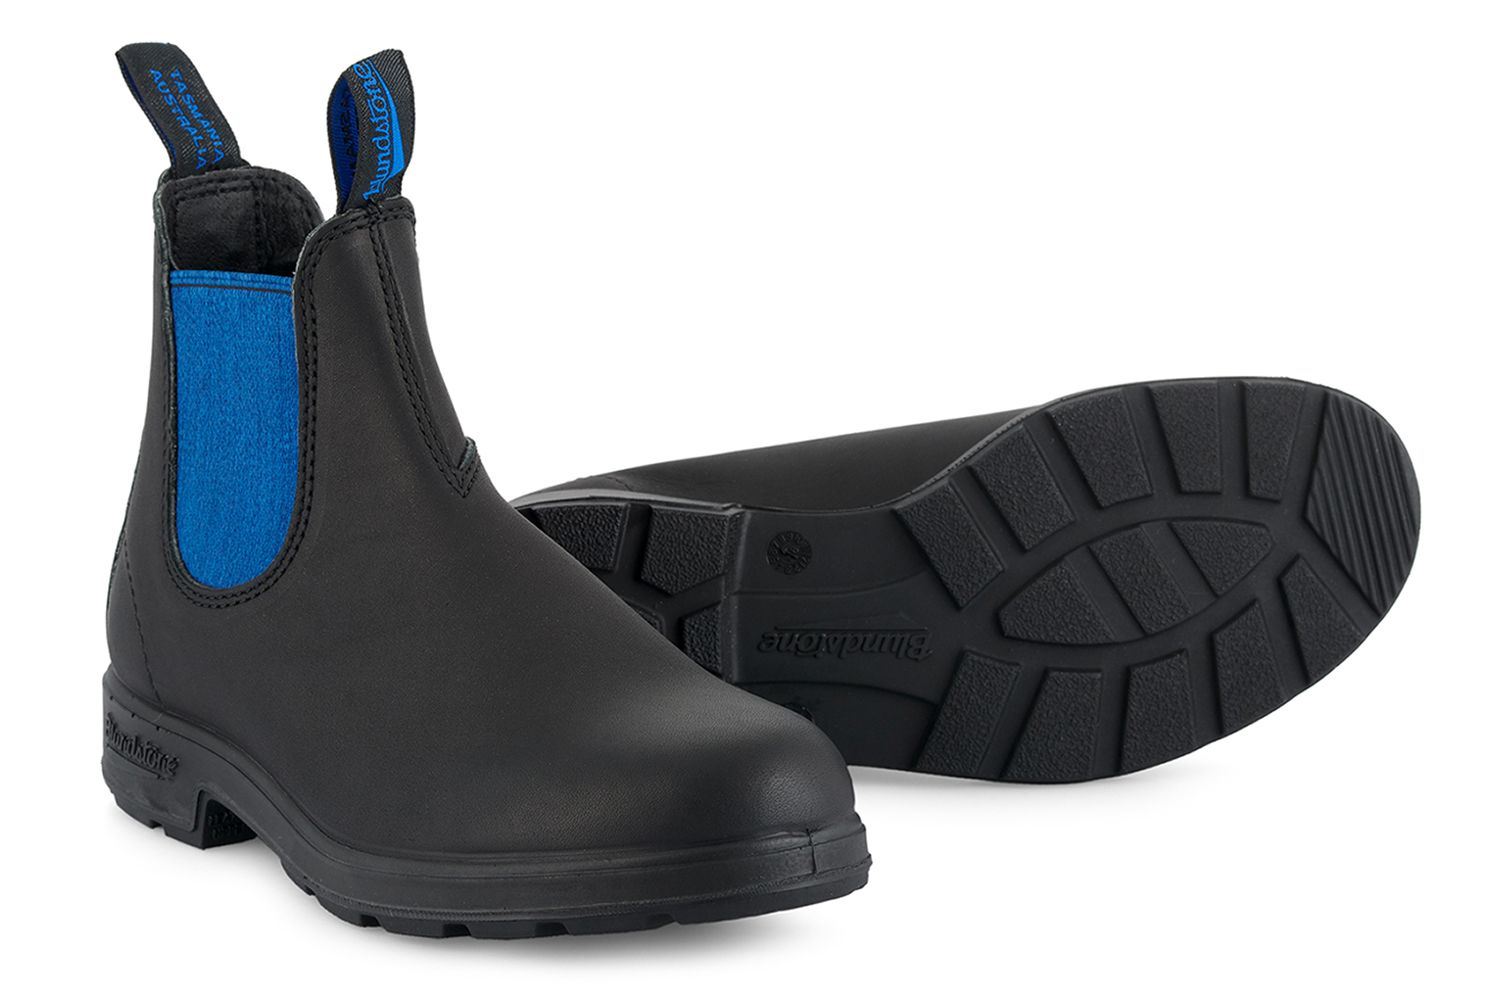 Blundstone 515 Black Blue Leather Chelsea Boots